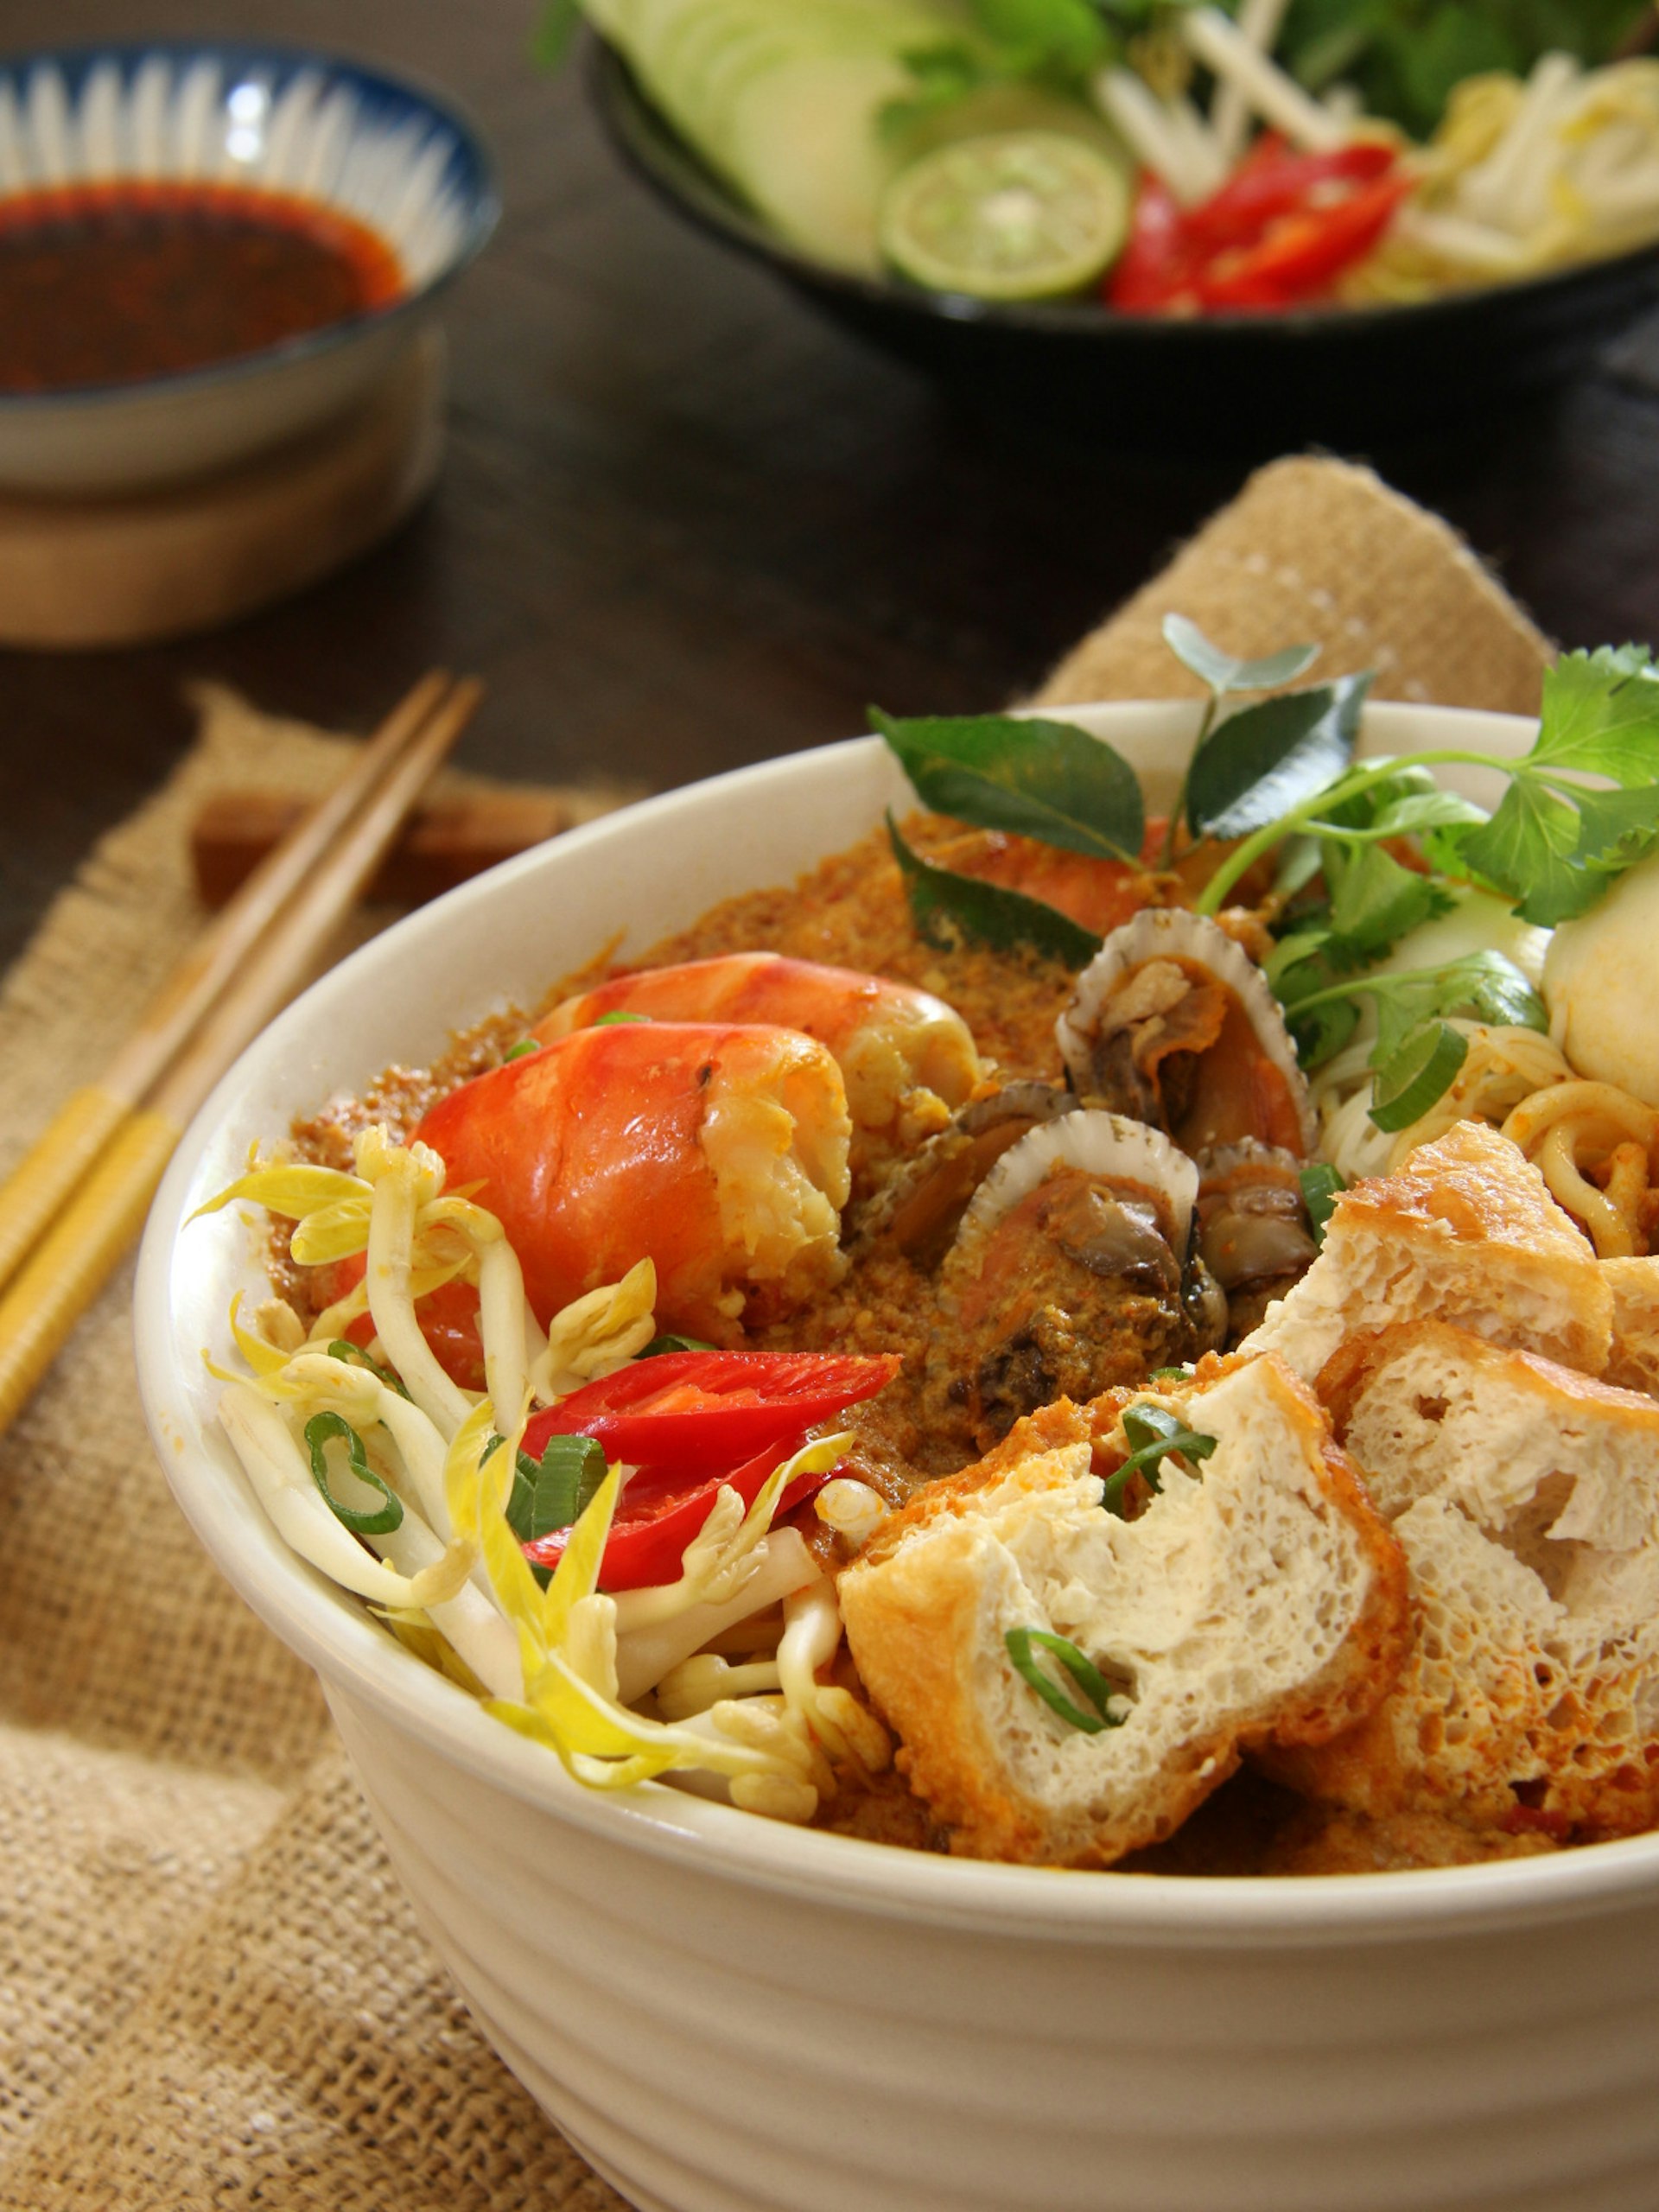 Peranakan laksa served in a bowl, accompanied with chili sauce and extra vegetables